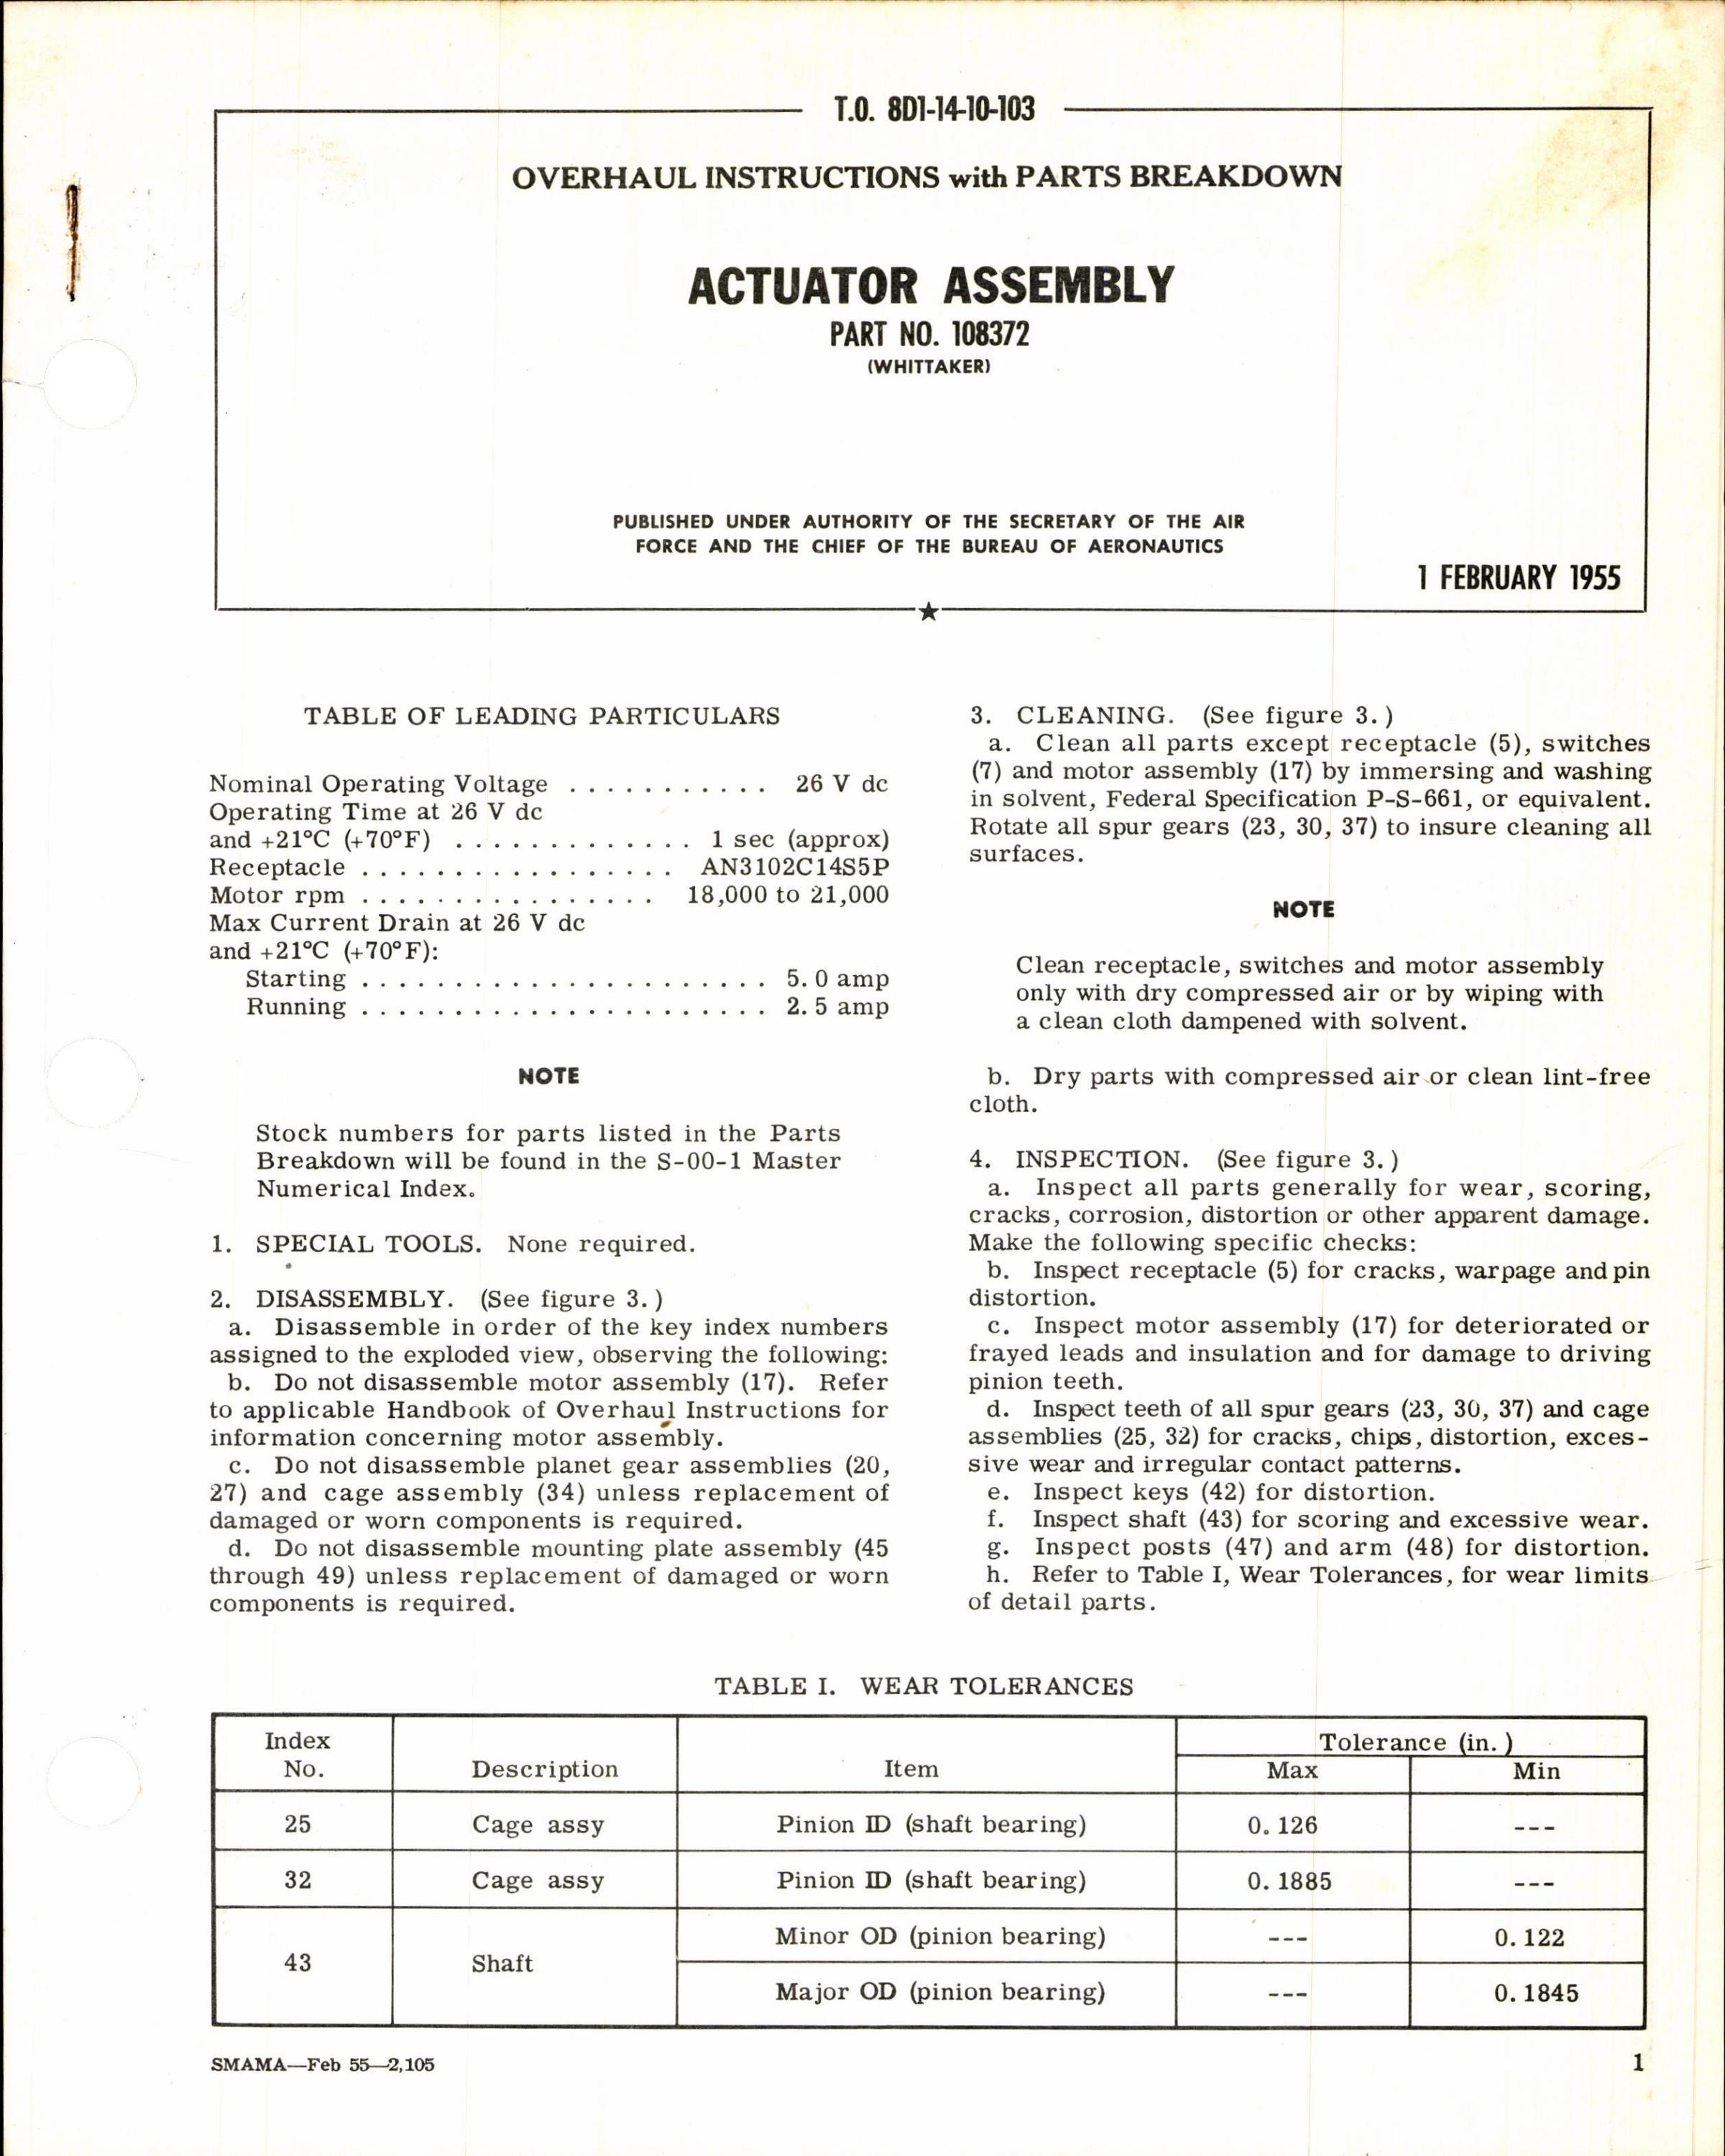 Sample page 1 from AirCorps Library document: Instructions w Parts Breakdown for Actuator Assembly Part 108372